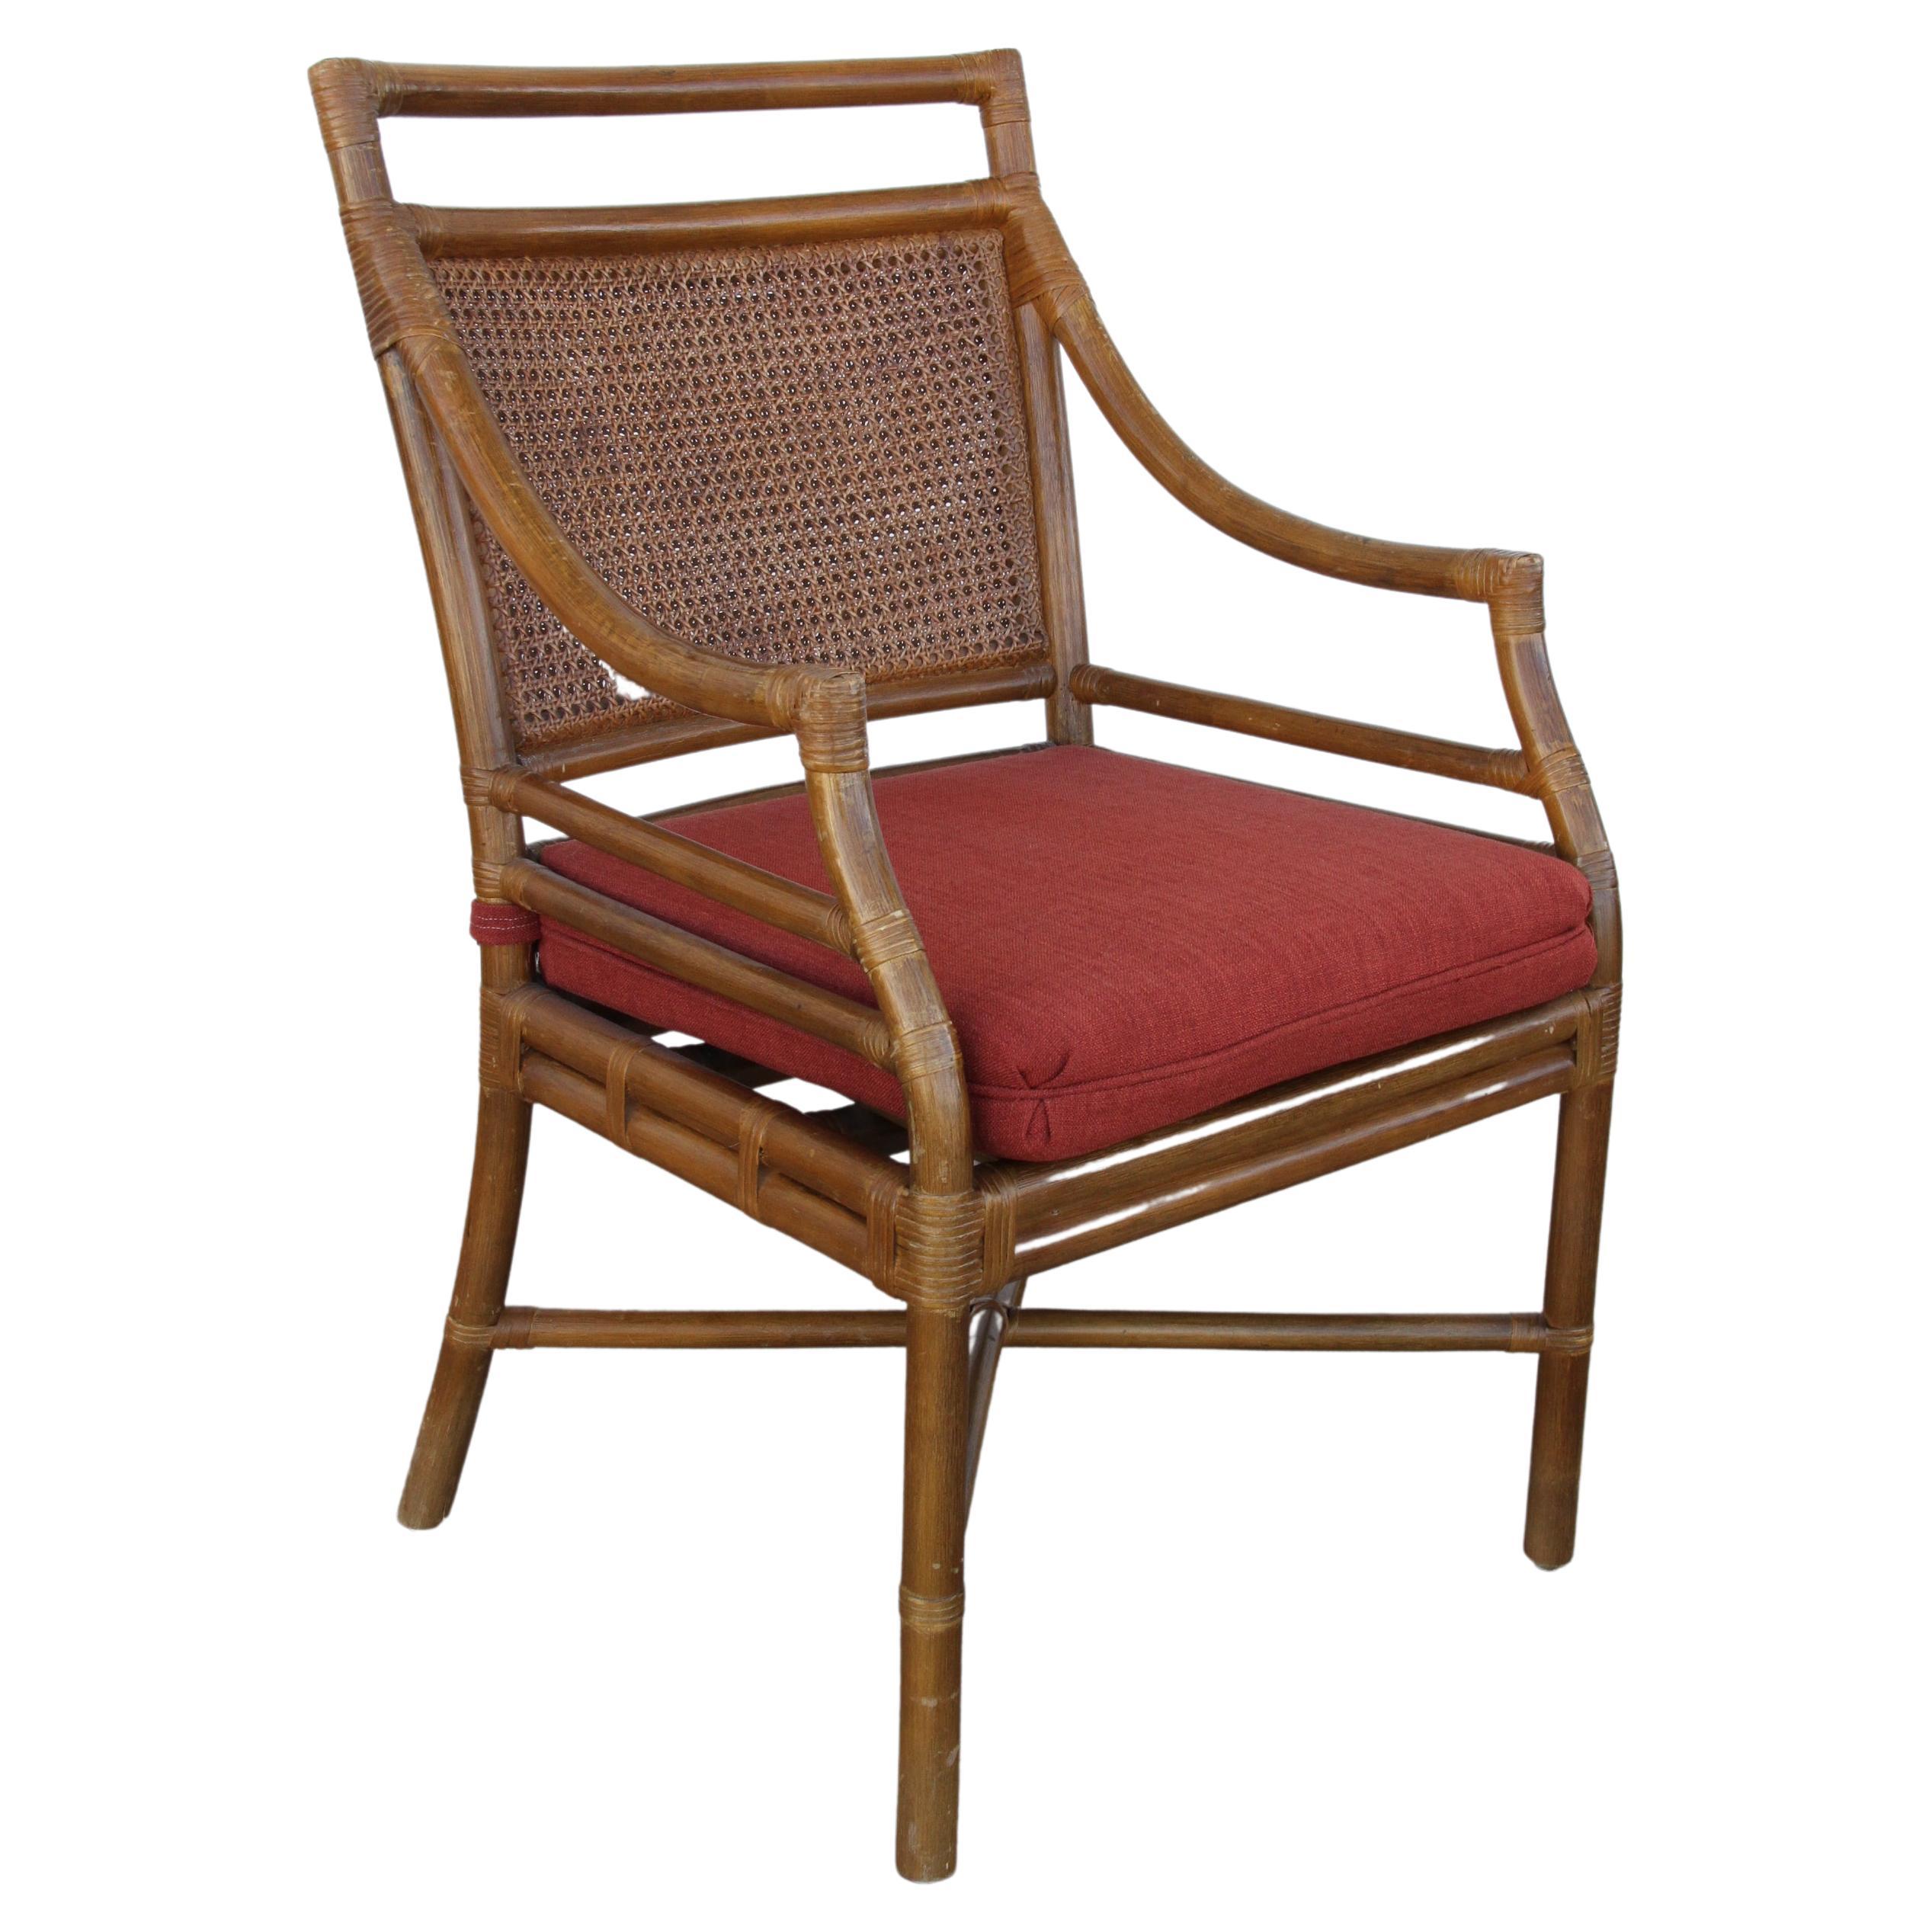 McGuire style midcentury cane bamboo dining chairs

Set of stunning bamboo and handwoven cane dining chairs.
The upholstery is in a wine fabric.

Measures: 22”x24”x36” Seat height 19”.

